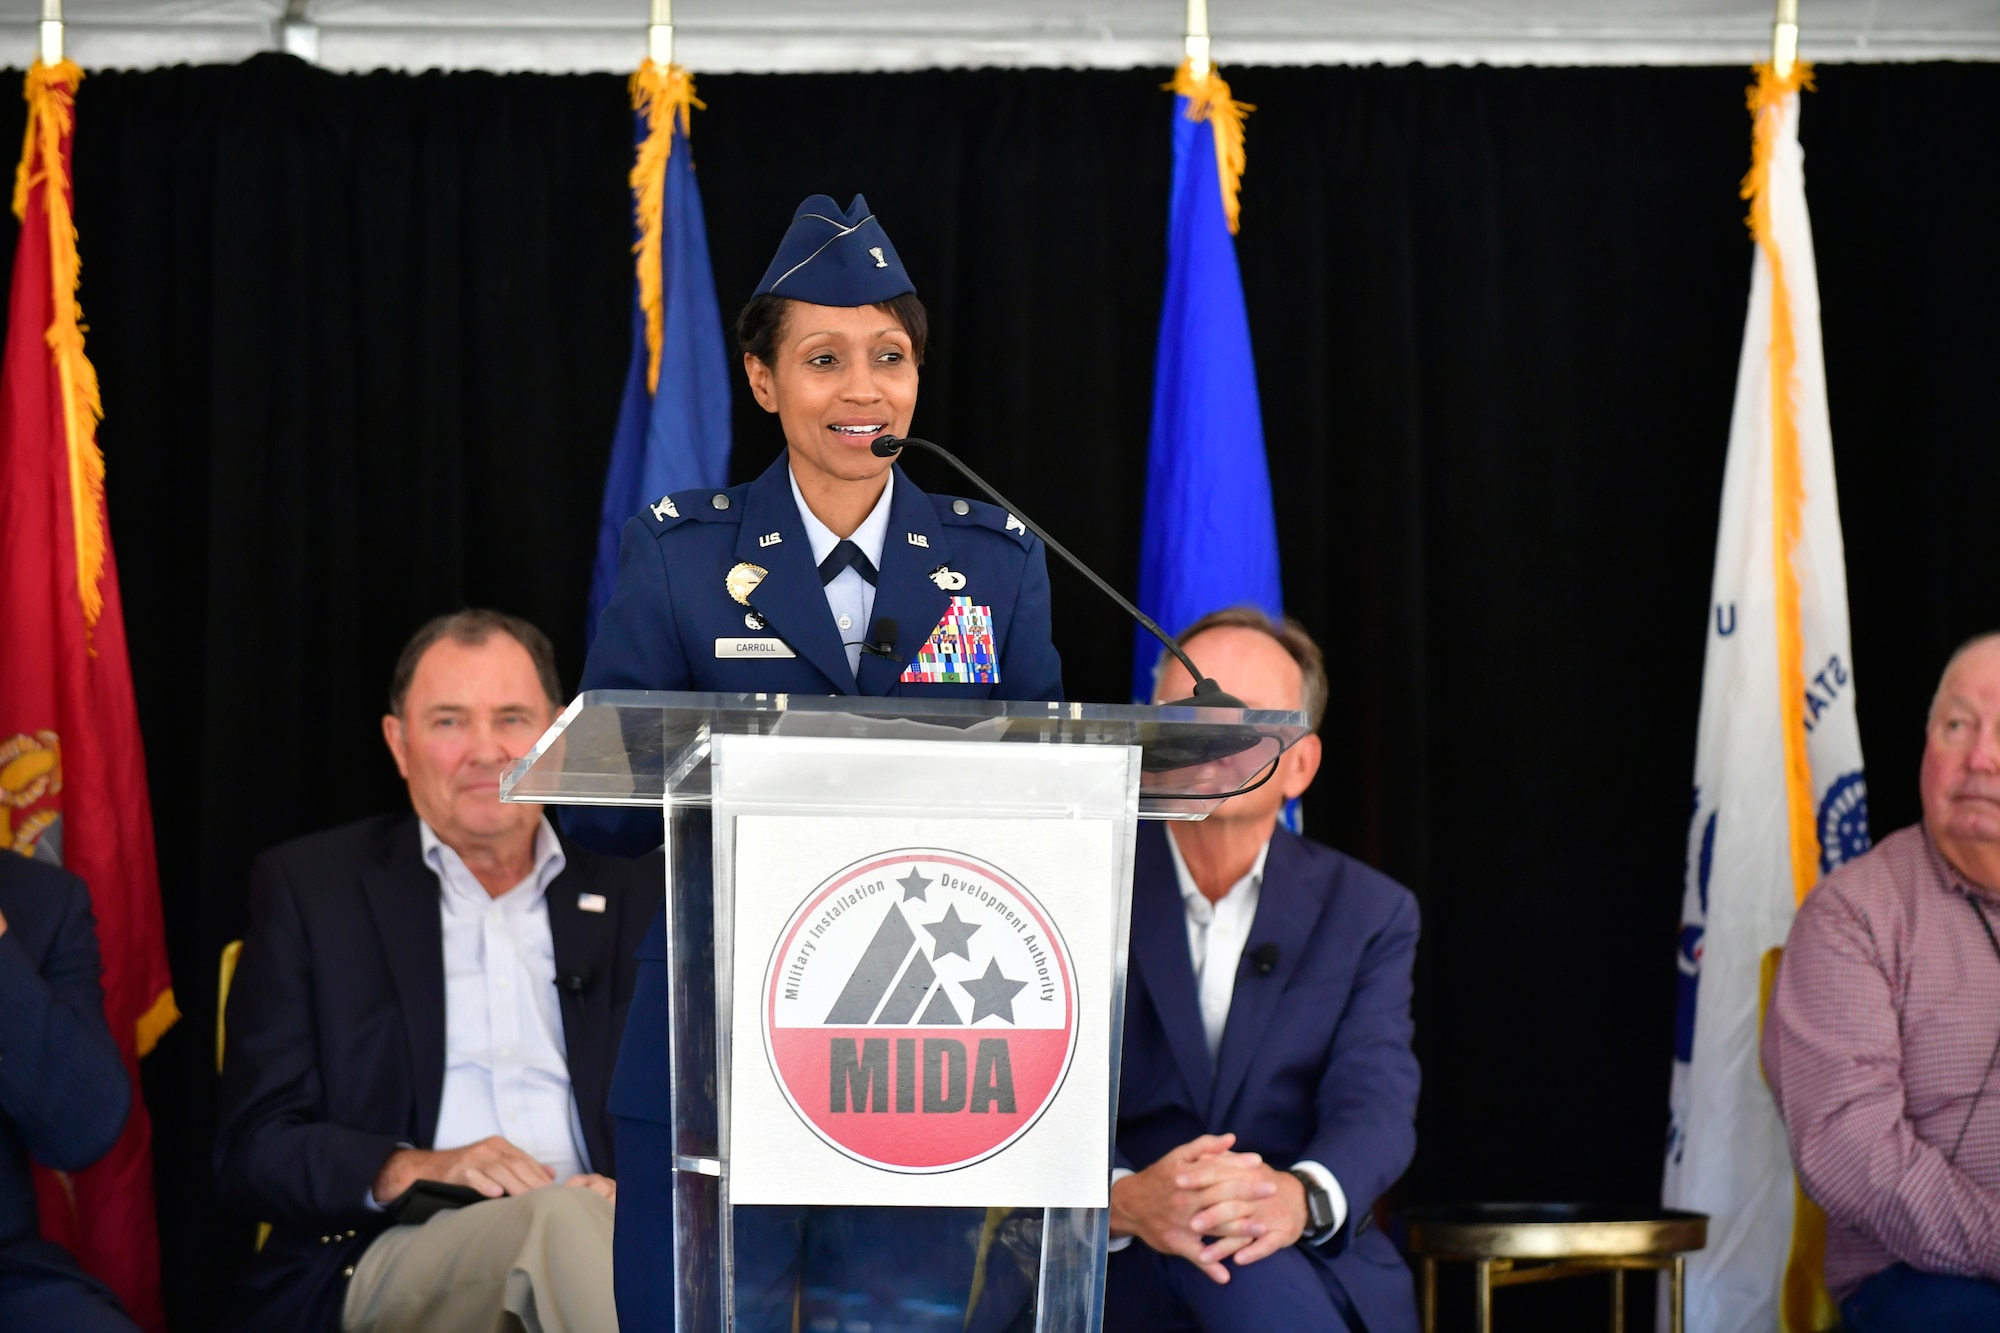 Col. Jenise Carroll, 75th Air Base Wing commander, gives remarks at a June 9 ground breaking ceremony for the Mayflower Mountain Resort.  The 642,000-square-foot conference hotel will include a block of 100 rooms that will be available at a preferred rate for active duty and retired service members. (U.S. Air Force photo by Todd Cromar)